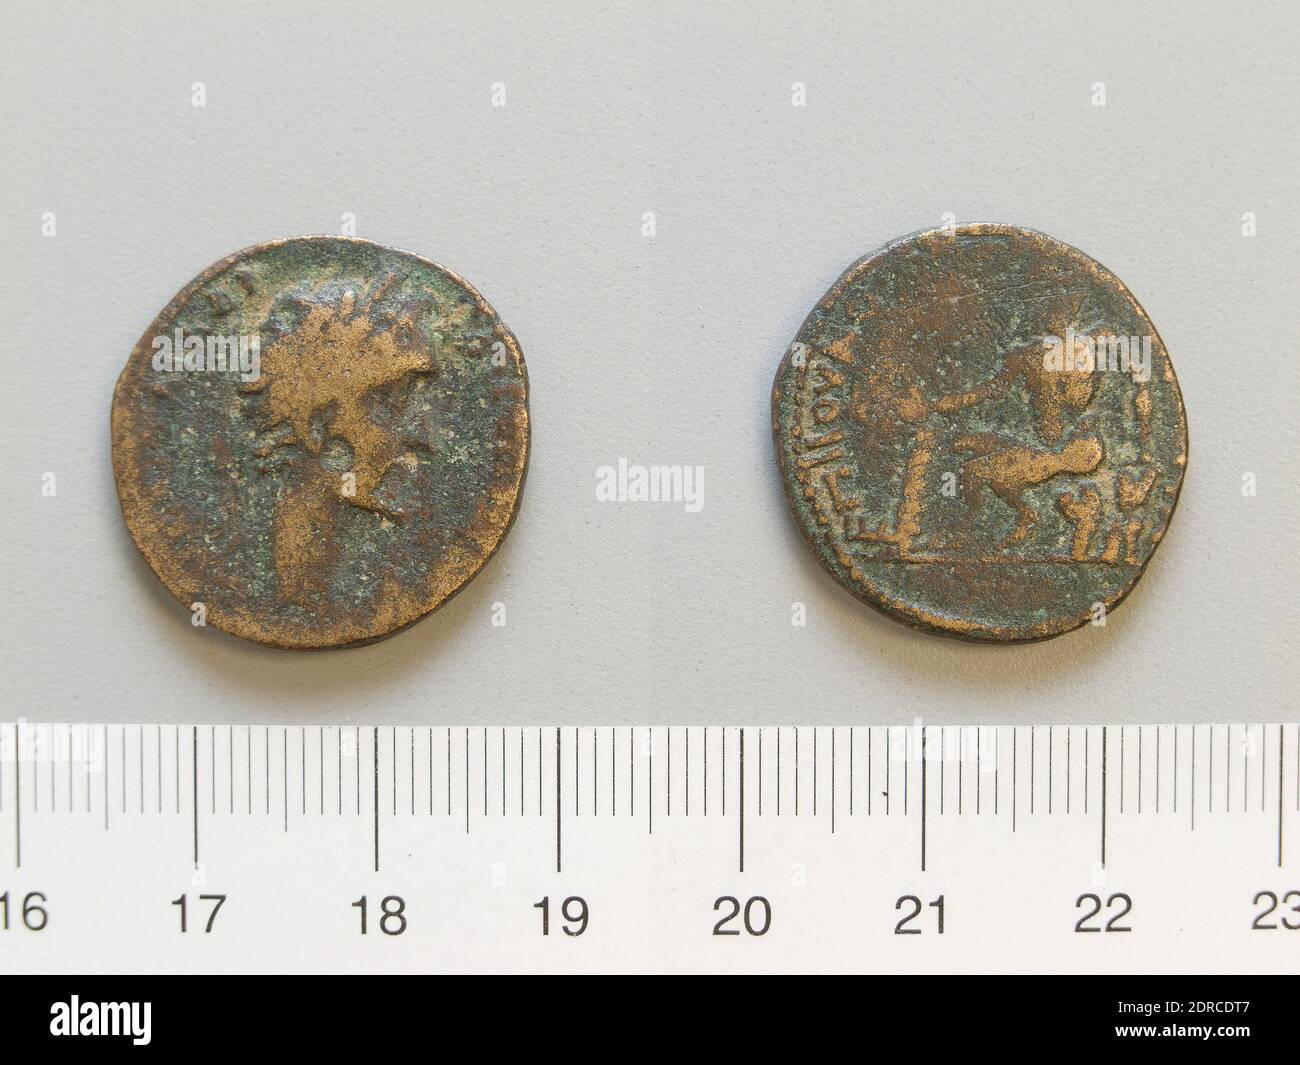 Ruler: Antoninus Pius, Emperor of Rome, A.D. 86–161, ruled A.D. 138–161, Mint: Topirus, Coin of Antoninus Pius, Emperor of Rome from Topirus, 138–61, Copper, 7.32 g, 6:00, 23.60 mm, Made in Tropirus, Greek, 2nd century A.D., Numismatics Stock Photo